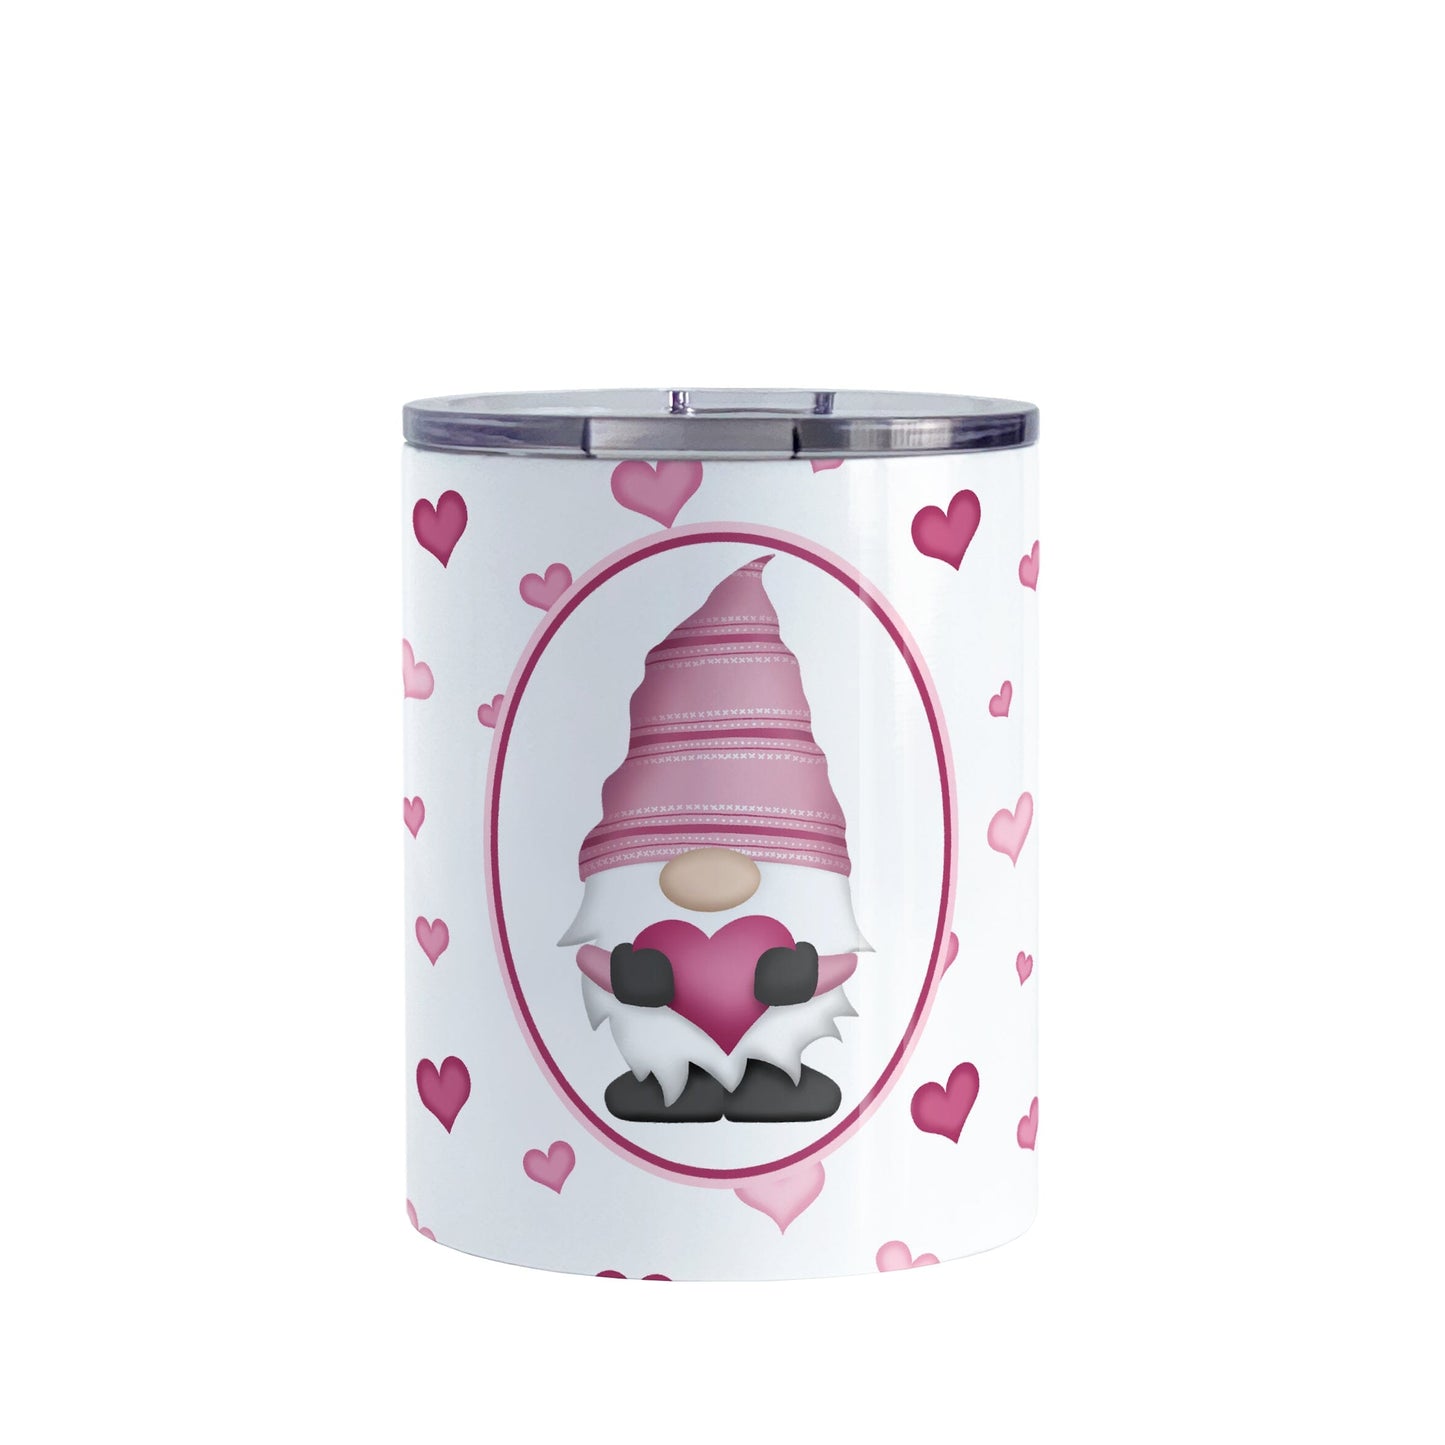 Pink Gnome Dainty Hearts Tumbler Cup (10oz) at Amy's Coffee Mugs. A stainless steel tumbler cup designed with an adorable pink gnome holding a heart in a white oval over a pattern of cute and dainty hearts in different shades of pink that wrap around the cup.